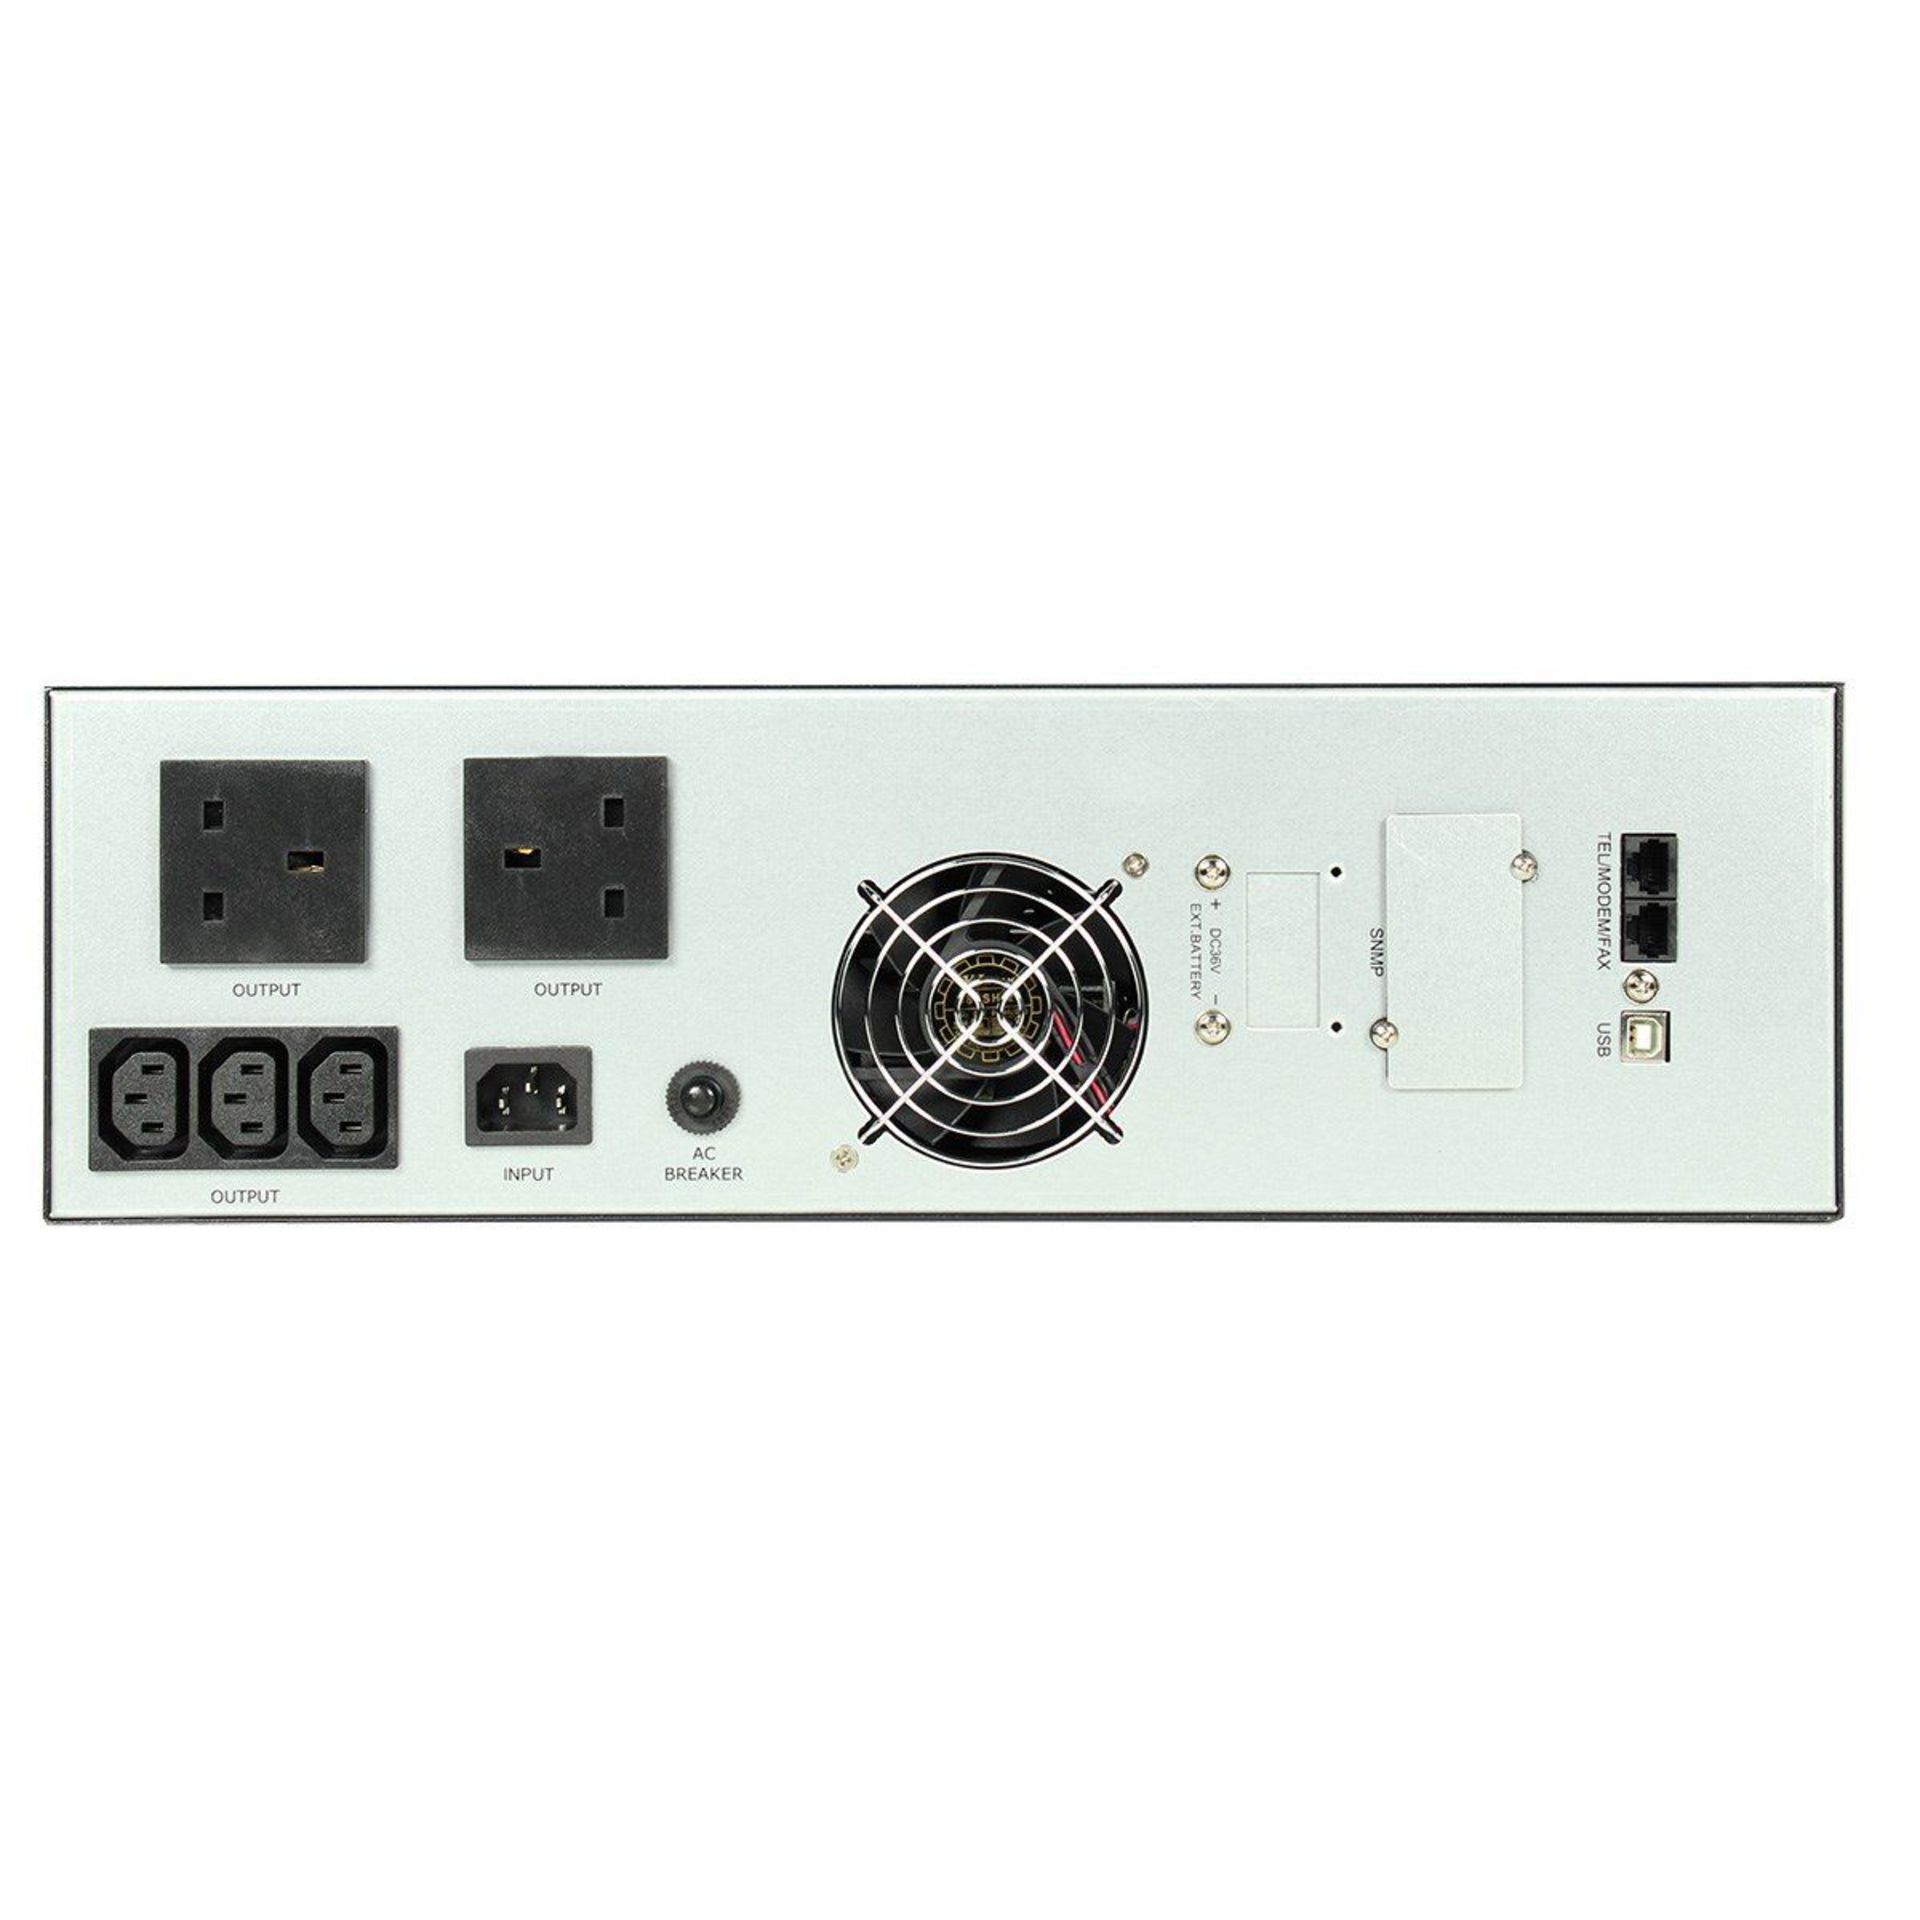 Powercool Rack-Mount Off-Line 2000VA UPS with LCD & USB Monitoring. - P2. RRP £435.00. The UPS - Image 2 of 2